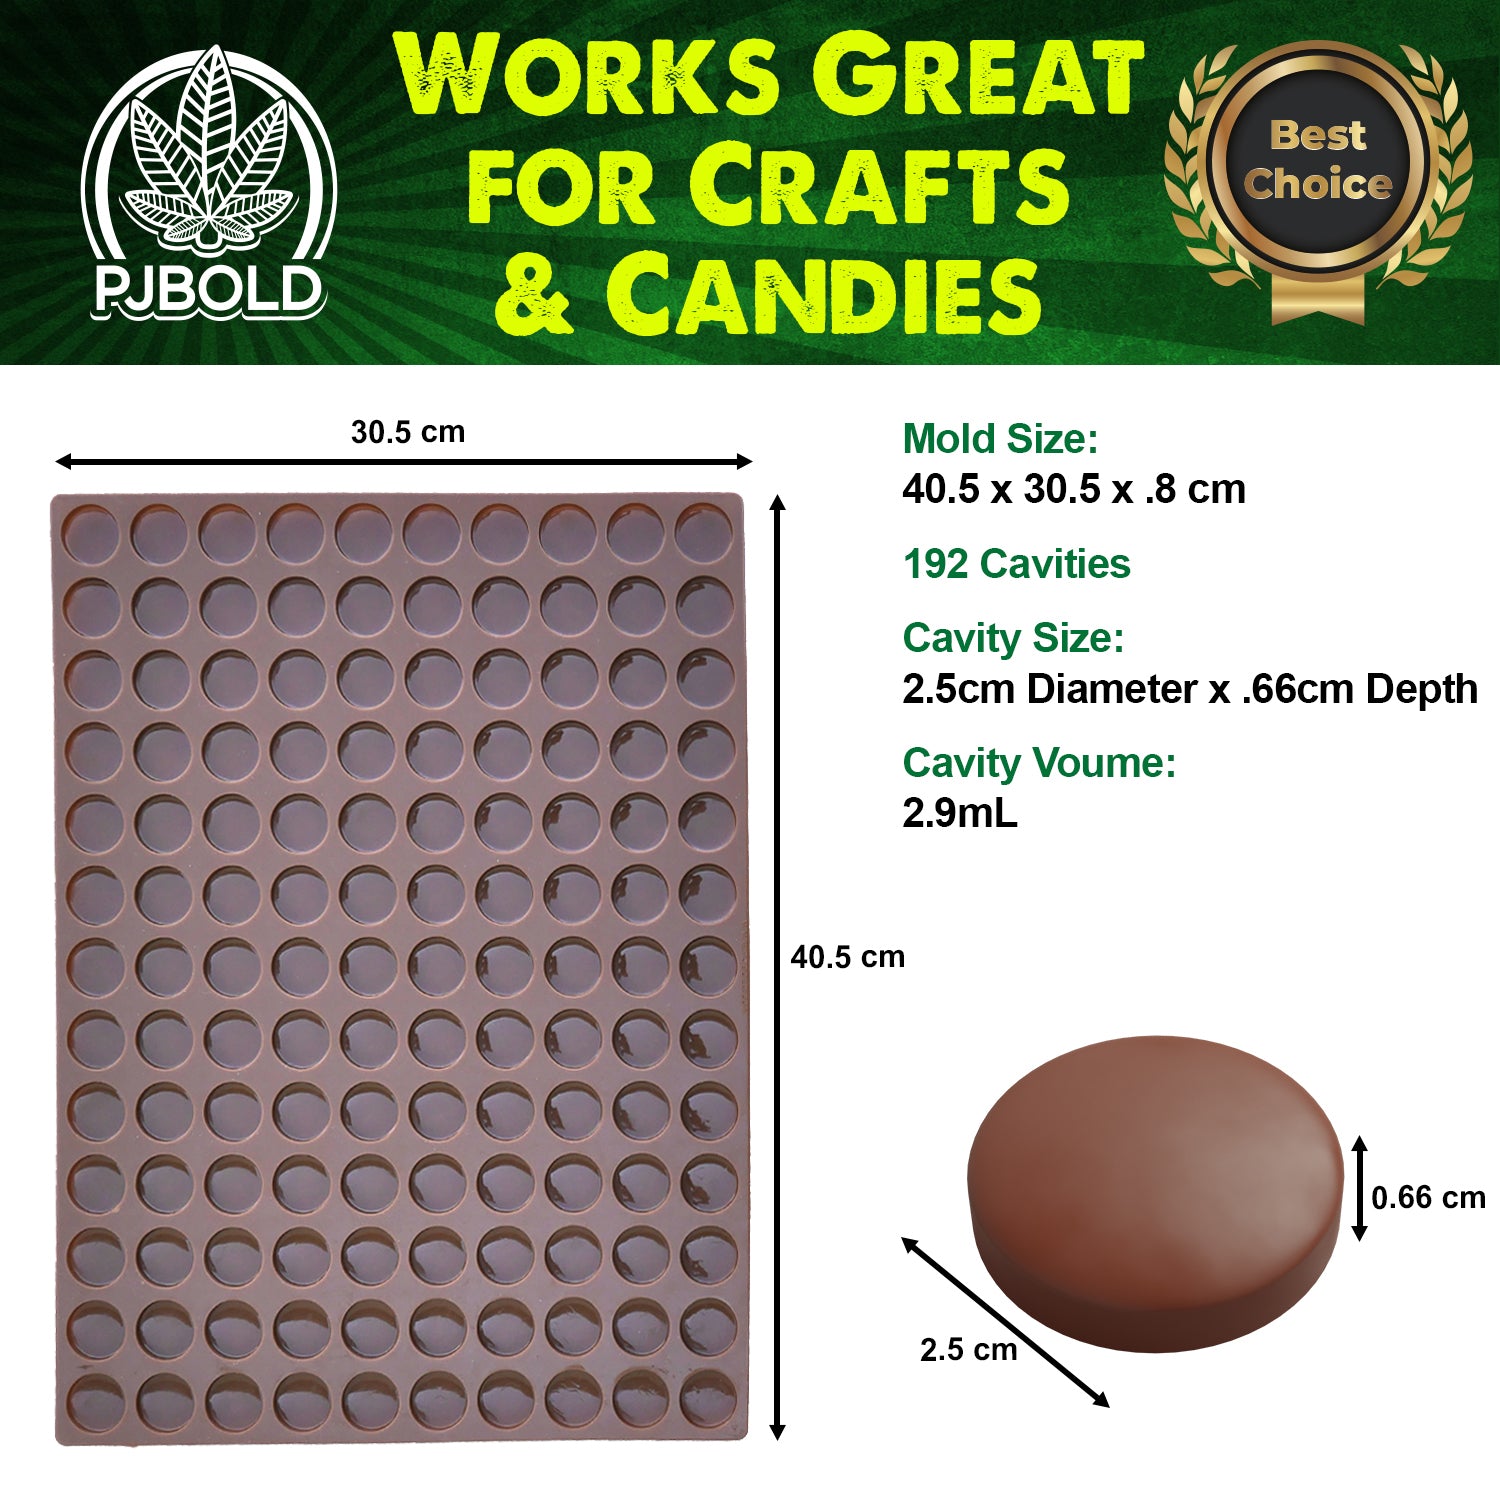 40 Cavity Mini Sphere Silicone Mold With Lid Options Chocolate Ice